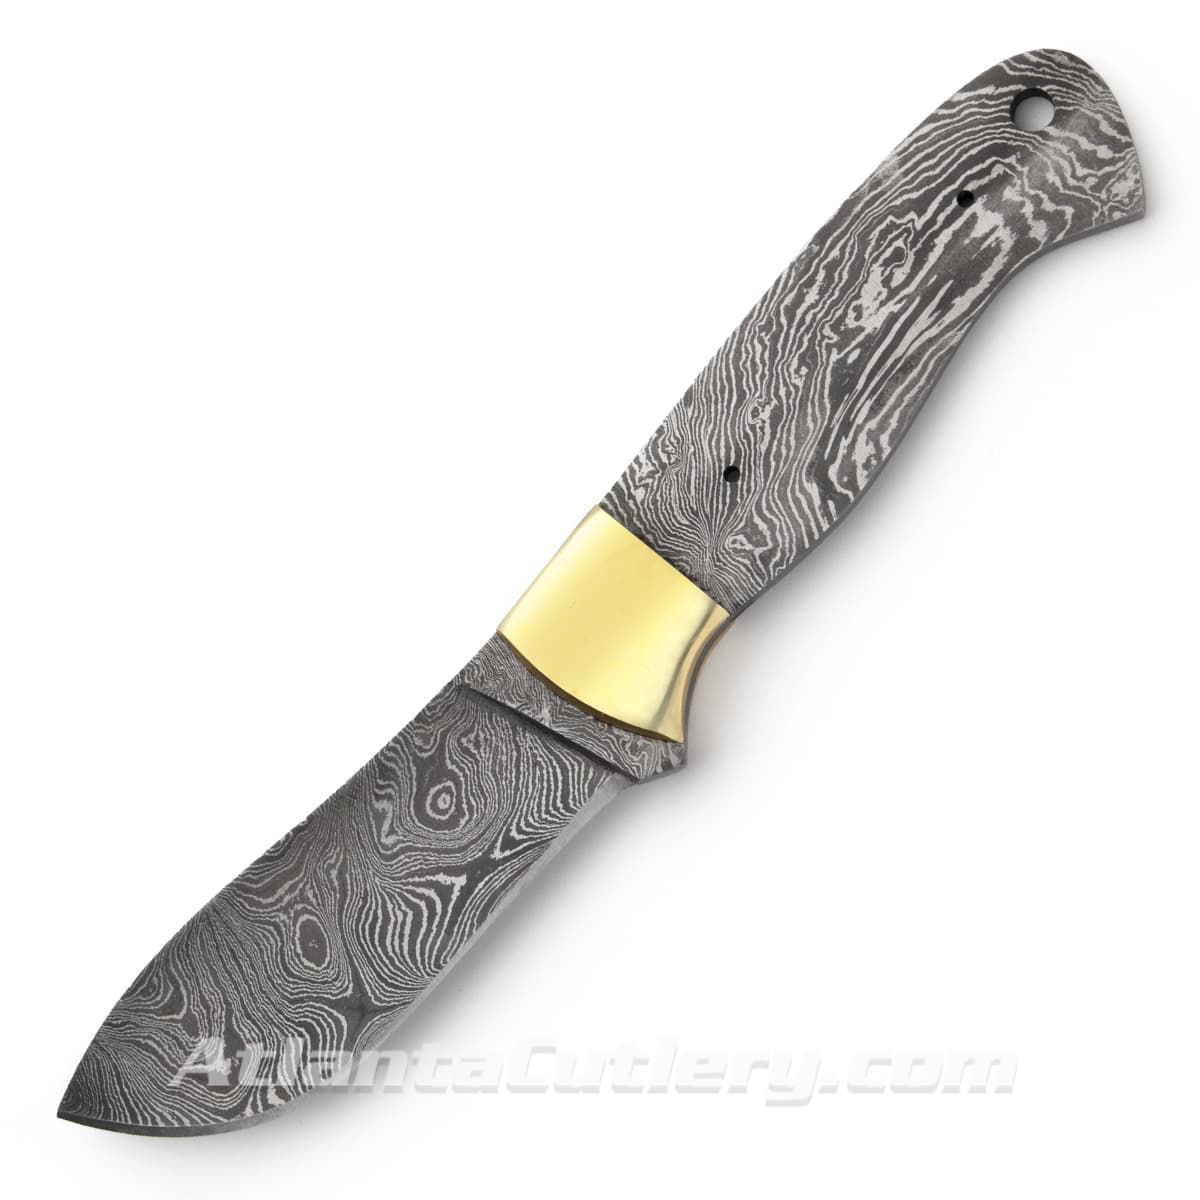 Pre-sharpened, full tang, etched Damascus wide-bellied skinner blade with attached brass bolsters is pre-drilled for 3/32" pins 